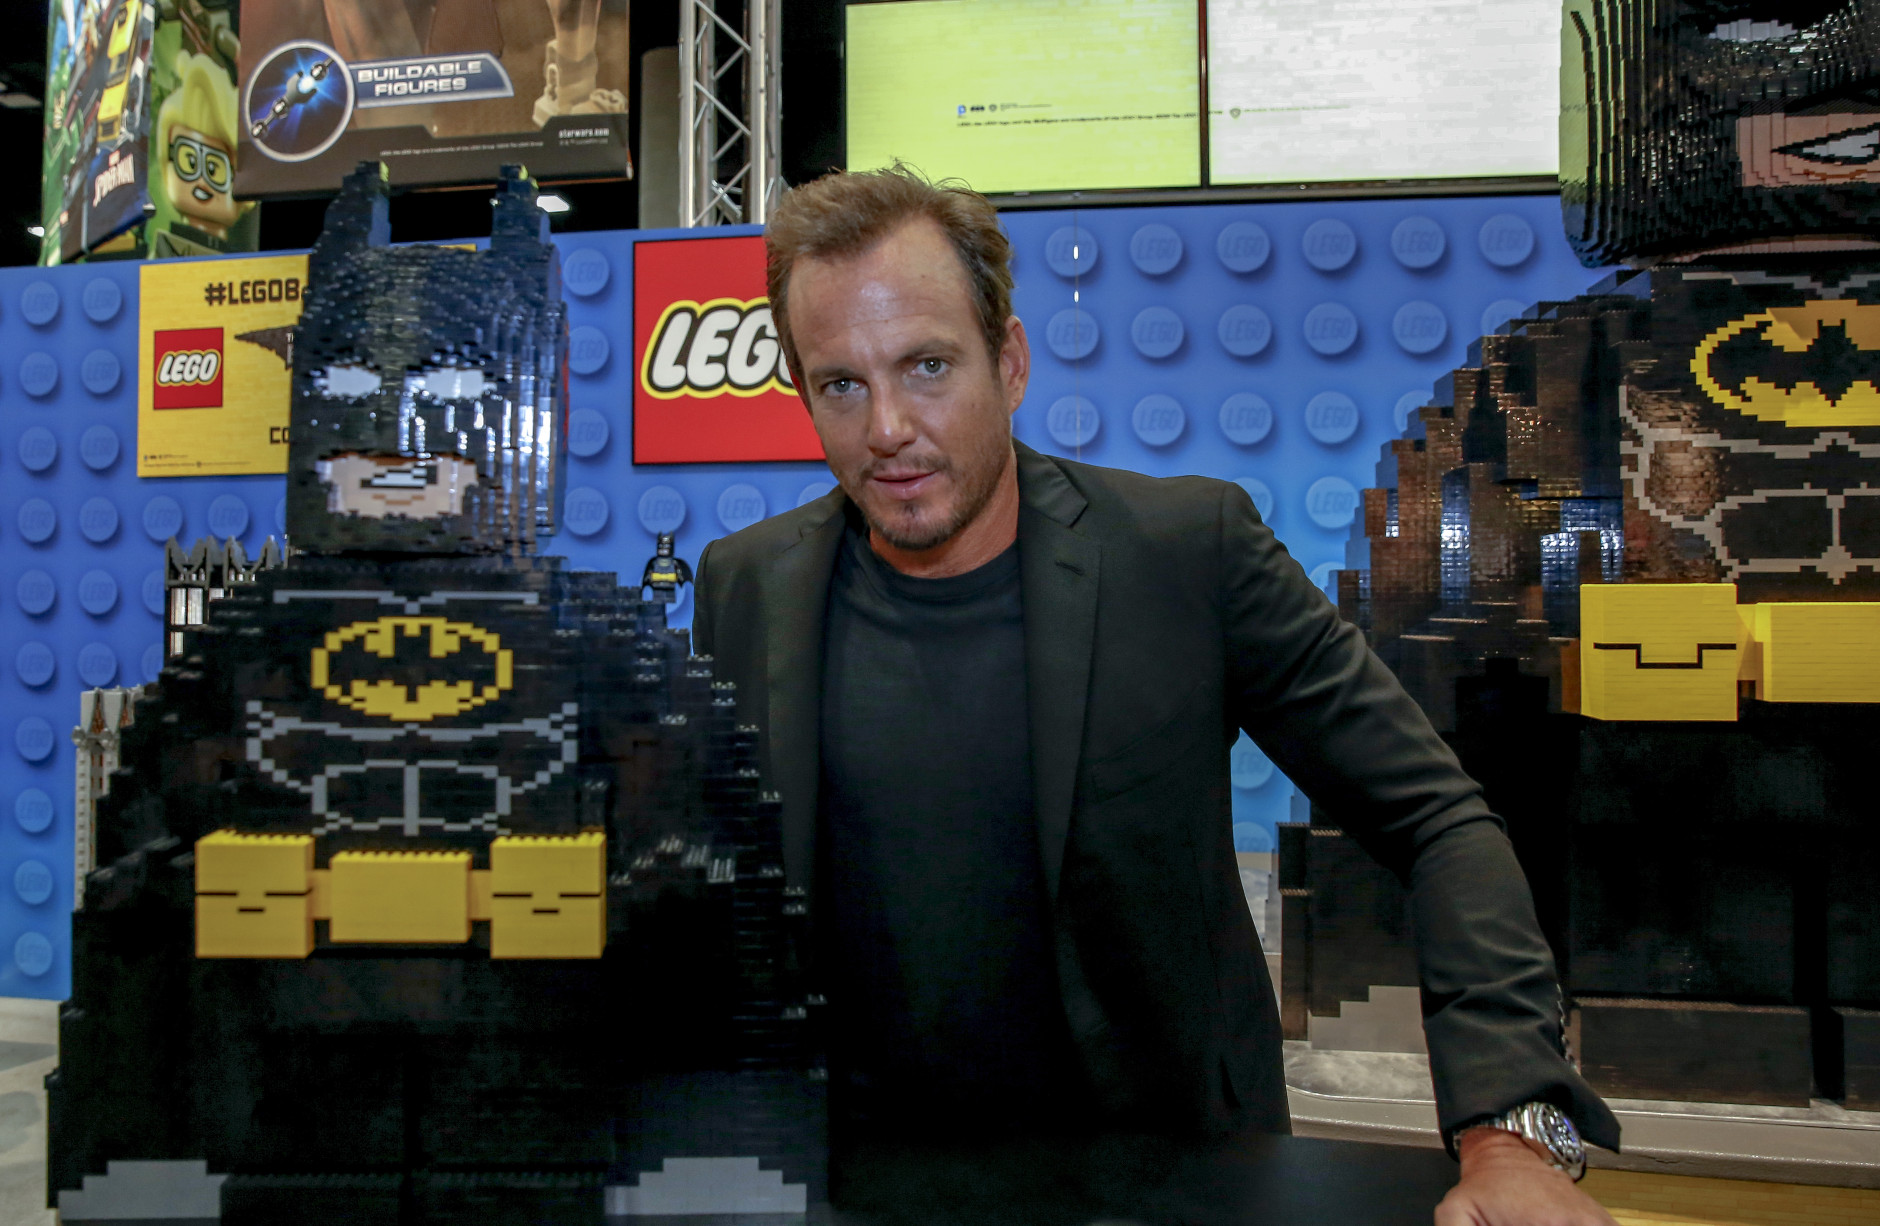 Will Arnett star of The LEGO Batman Movie makes an appearance at the LEGO booth at Comic-Con International on Saturday, July 23, 2016, in San Diego, CA. (Photo by Christy Radecic/Invision for LEGO/AP Images)